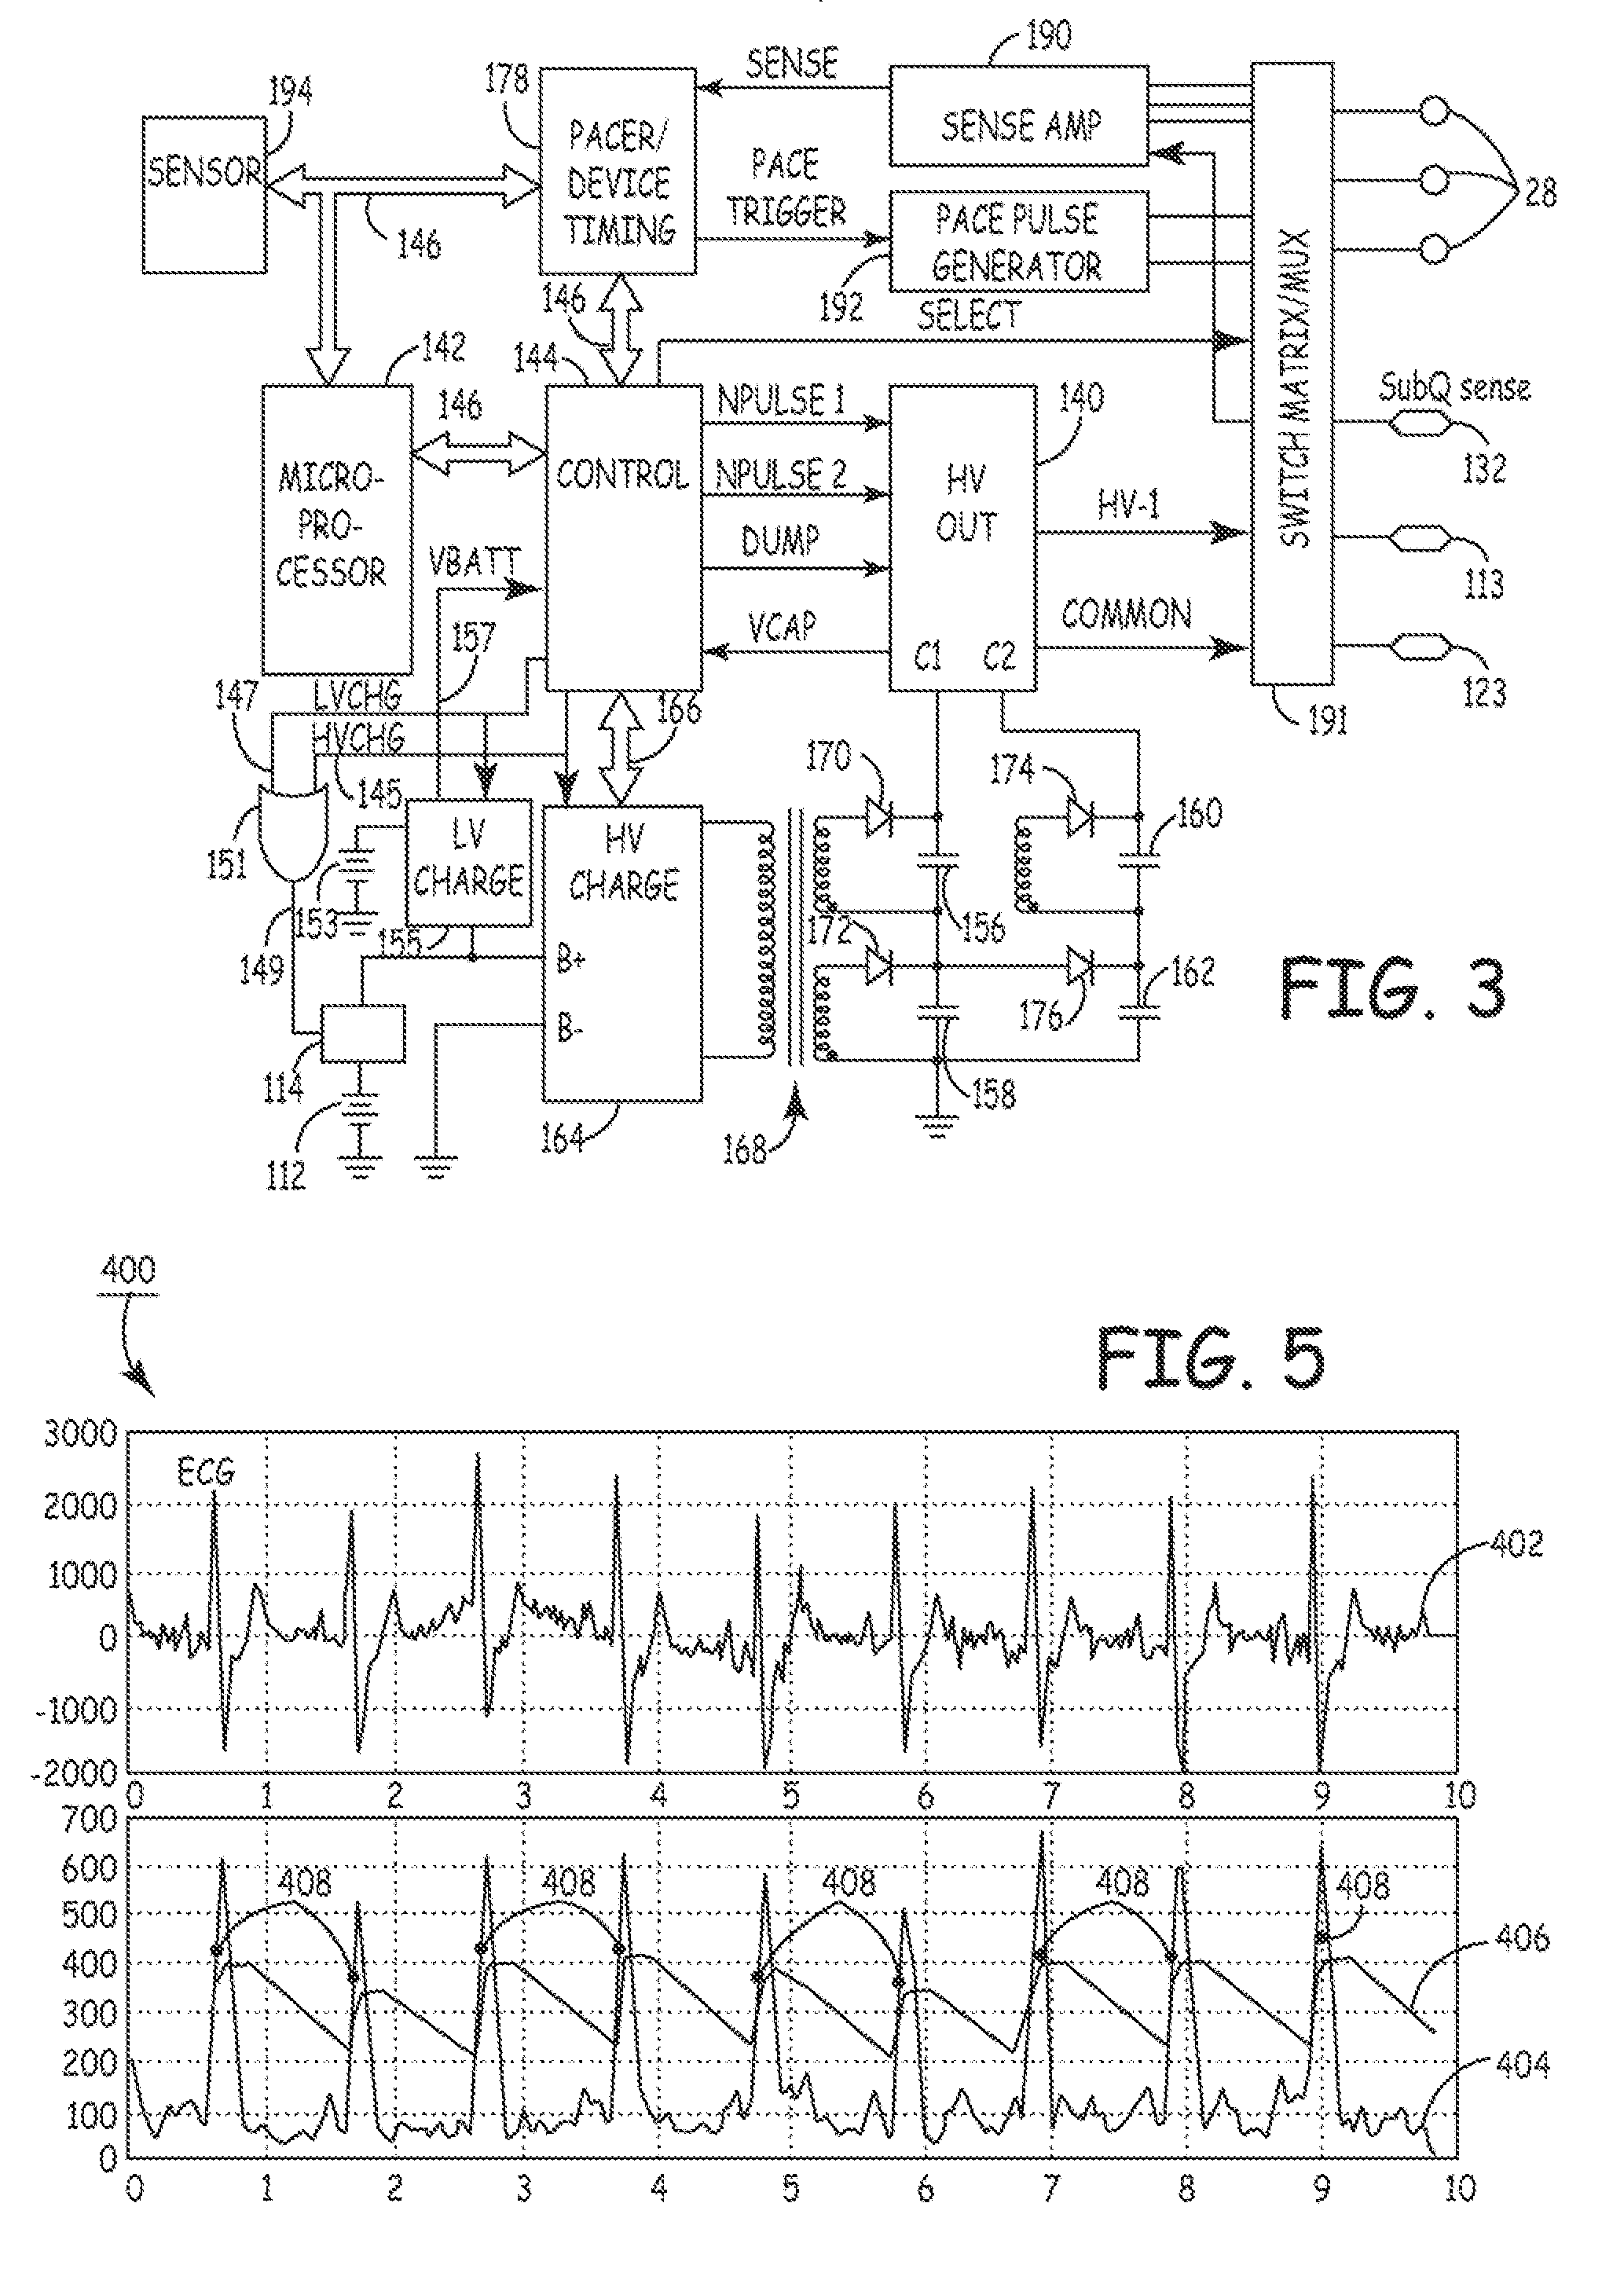 Method and apparatus for detecting arrhythmias in a subcutaneous medical device